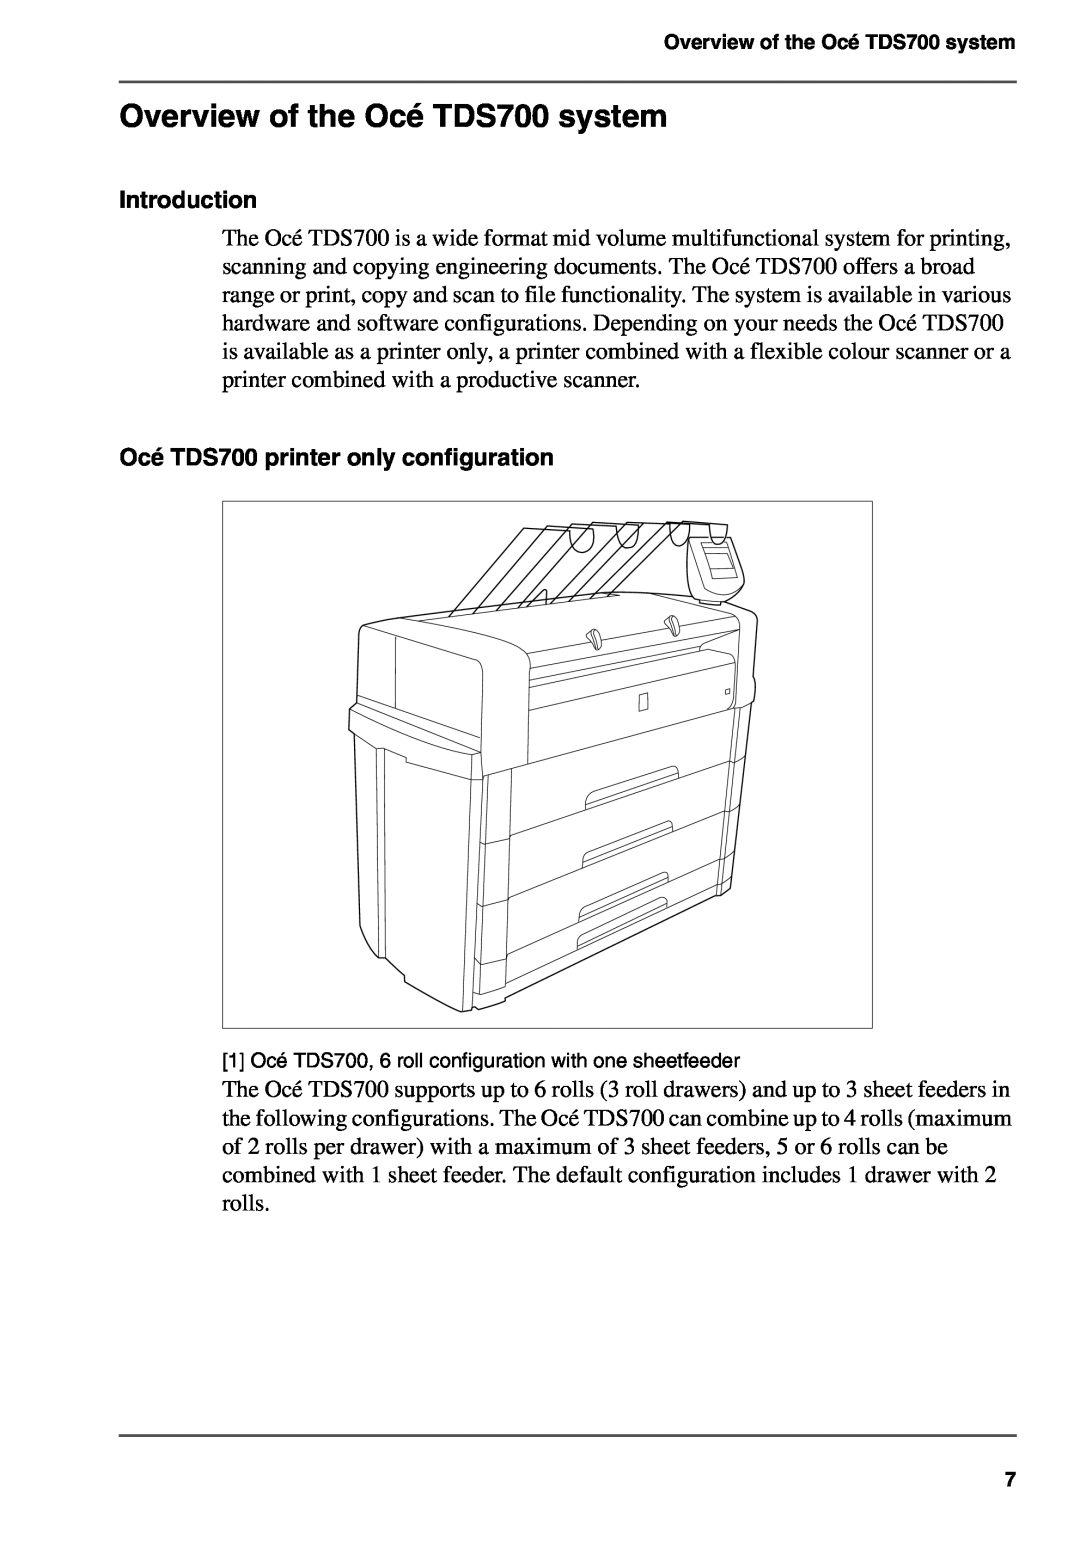 Oce North America user manual Overview of the Océ TDS700 system, Introduction, Océ TDS700 printer only configuration 